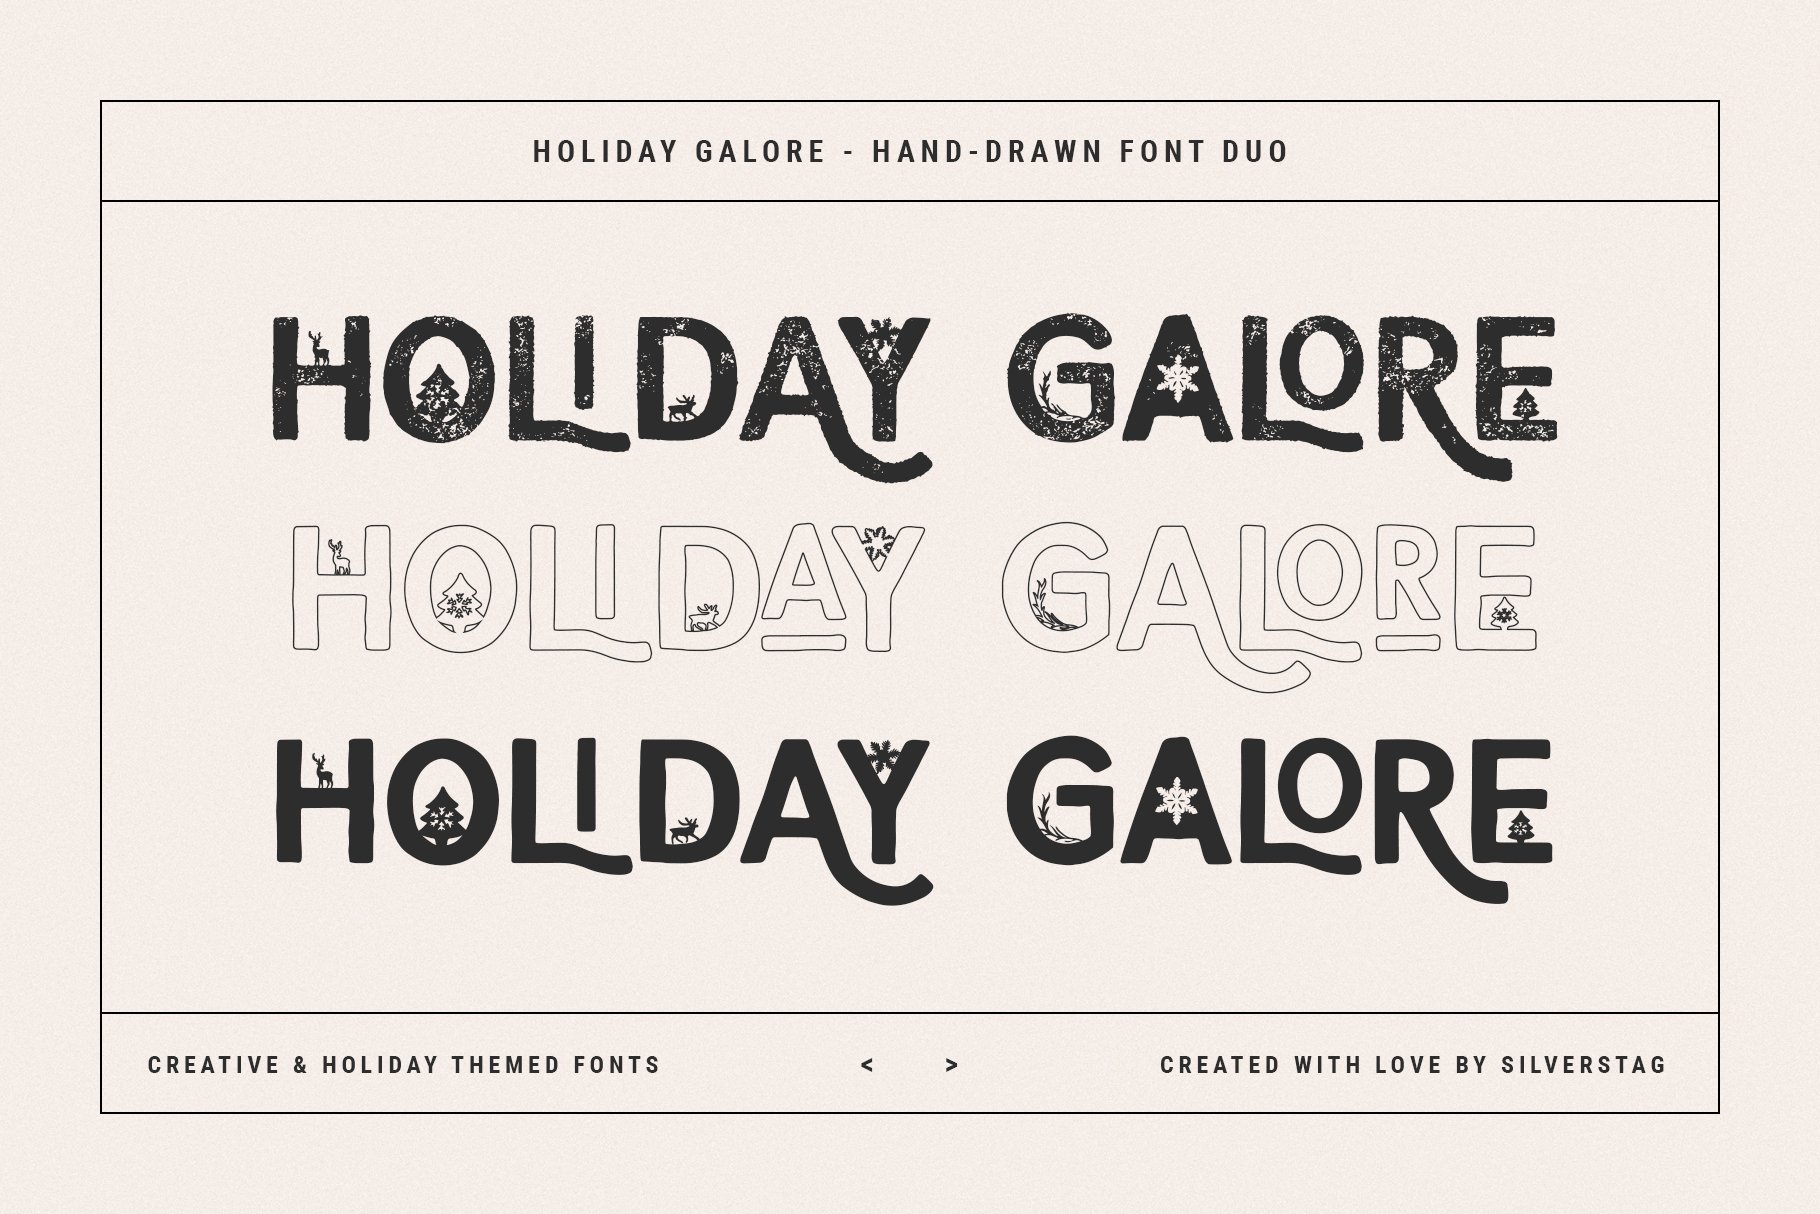 28 holiday galore font duo by silver stag 406